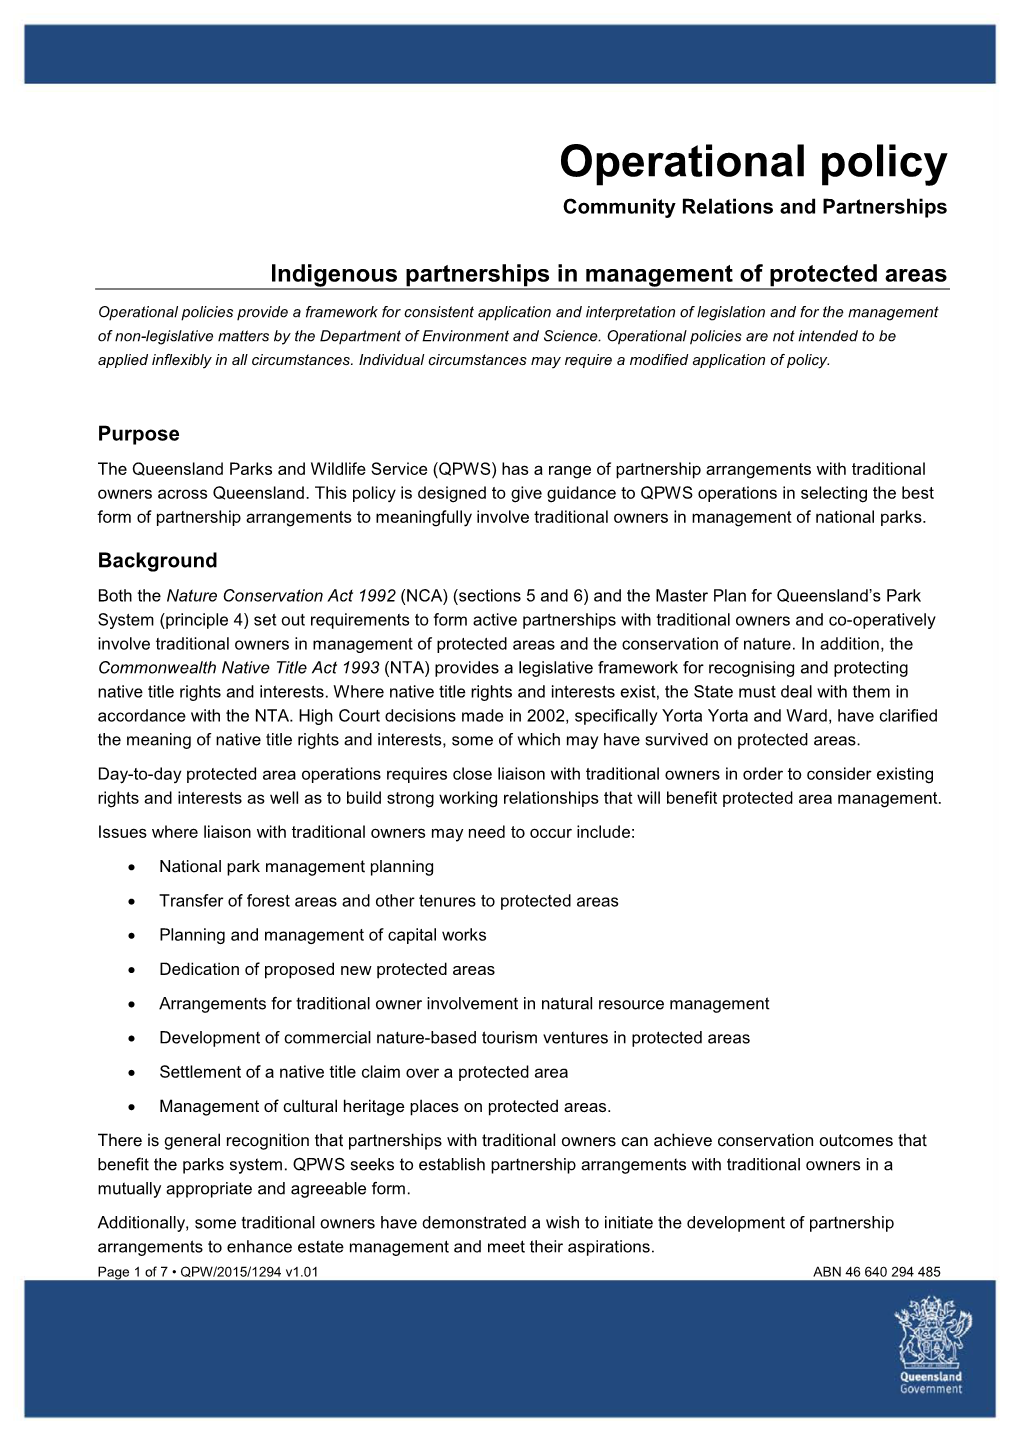 QPW/2015/1294 Indigenous Partnerships in Management of Protected Areas